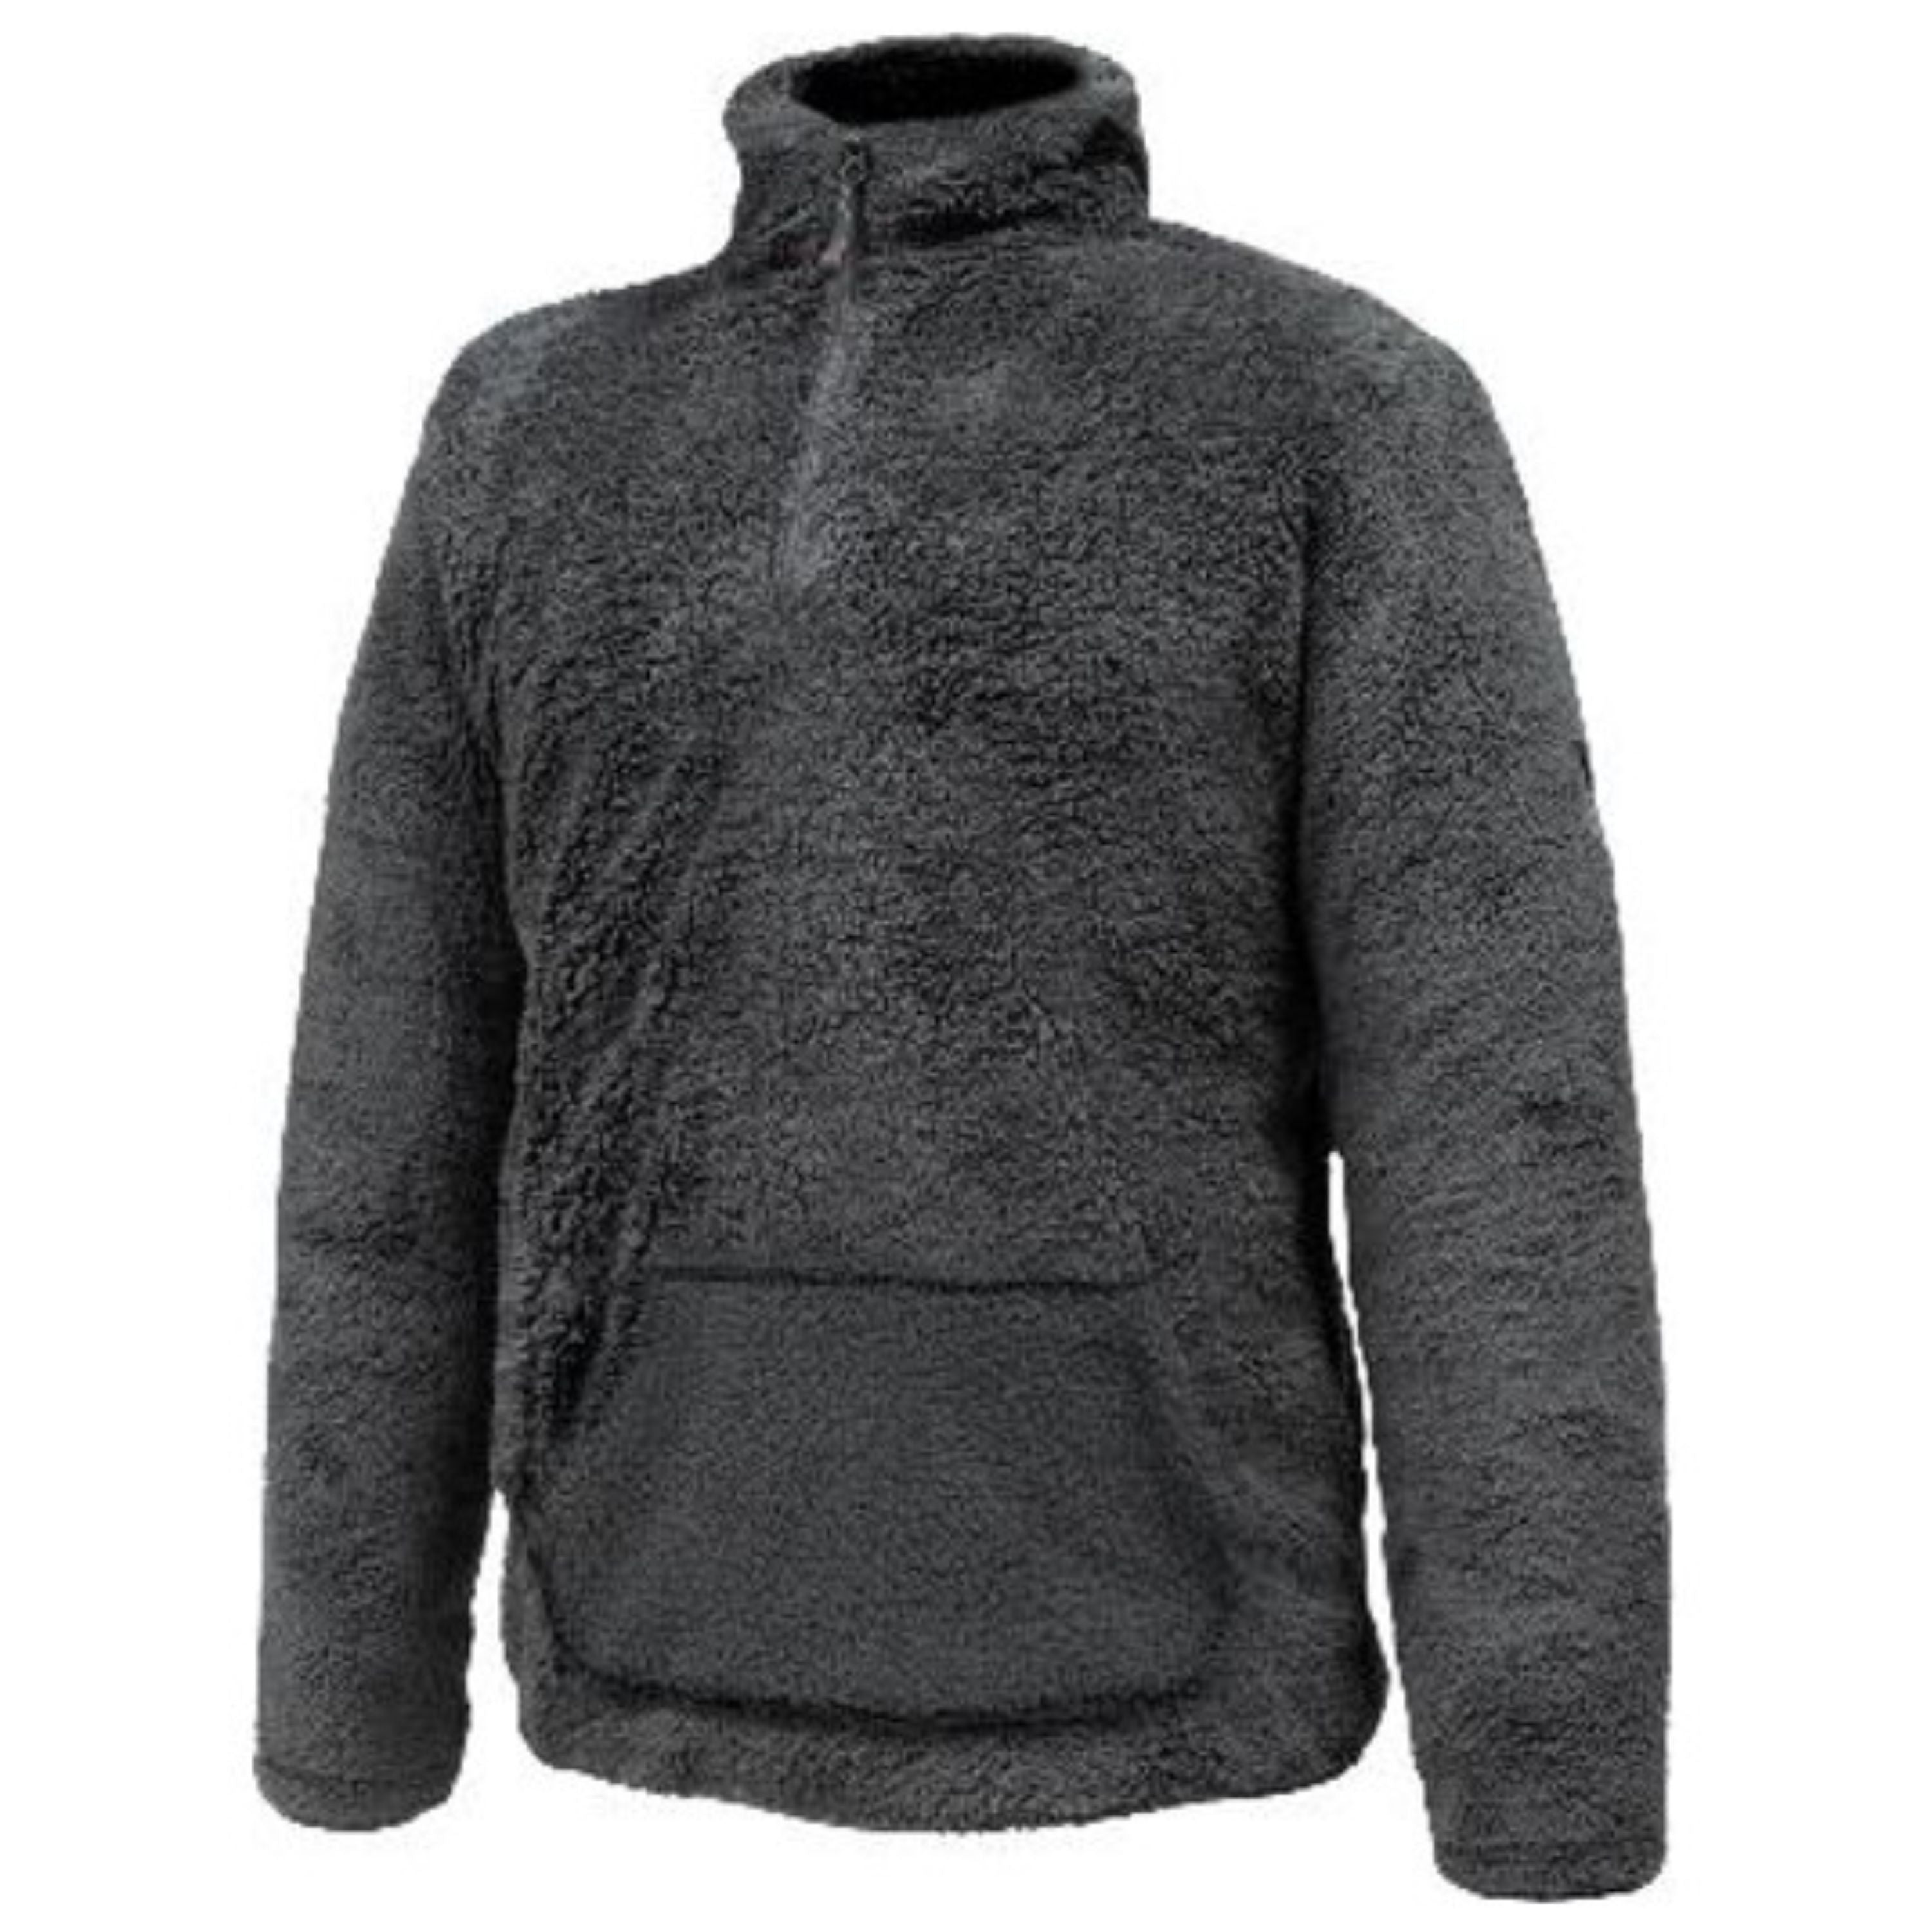 Laine polaire sherpa "Rustler" - Homme